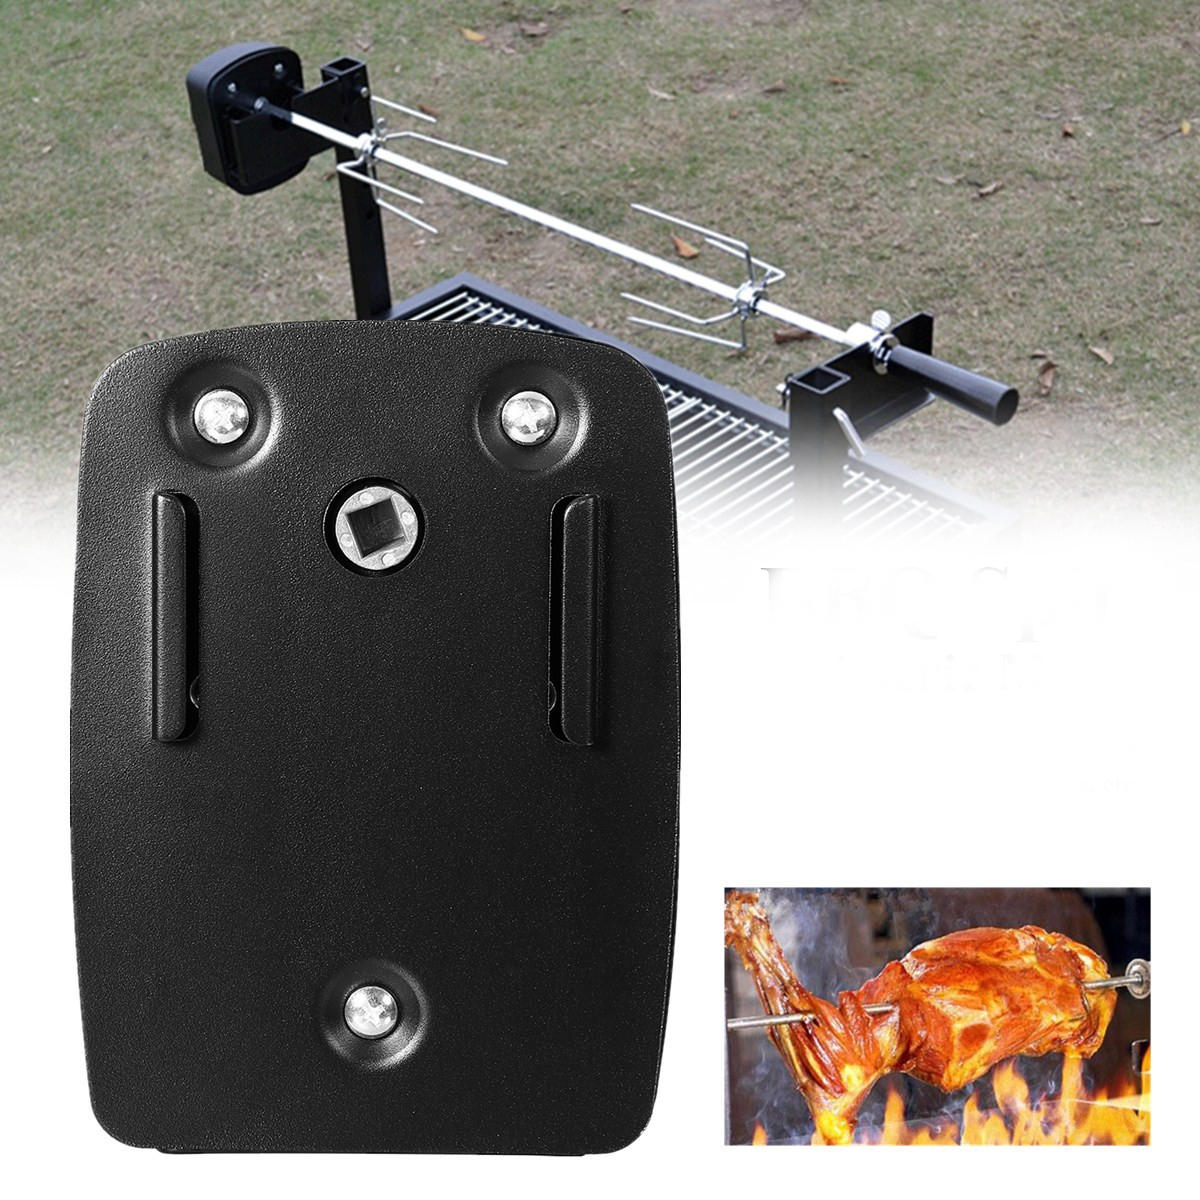 3V 1/2RPM Barbeque BBQ Spit Rotisserie Motor Outdoor Electric Roast Cooker